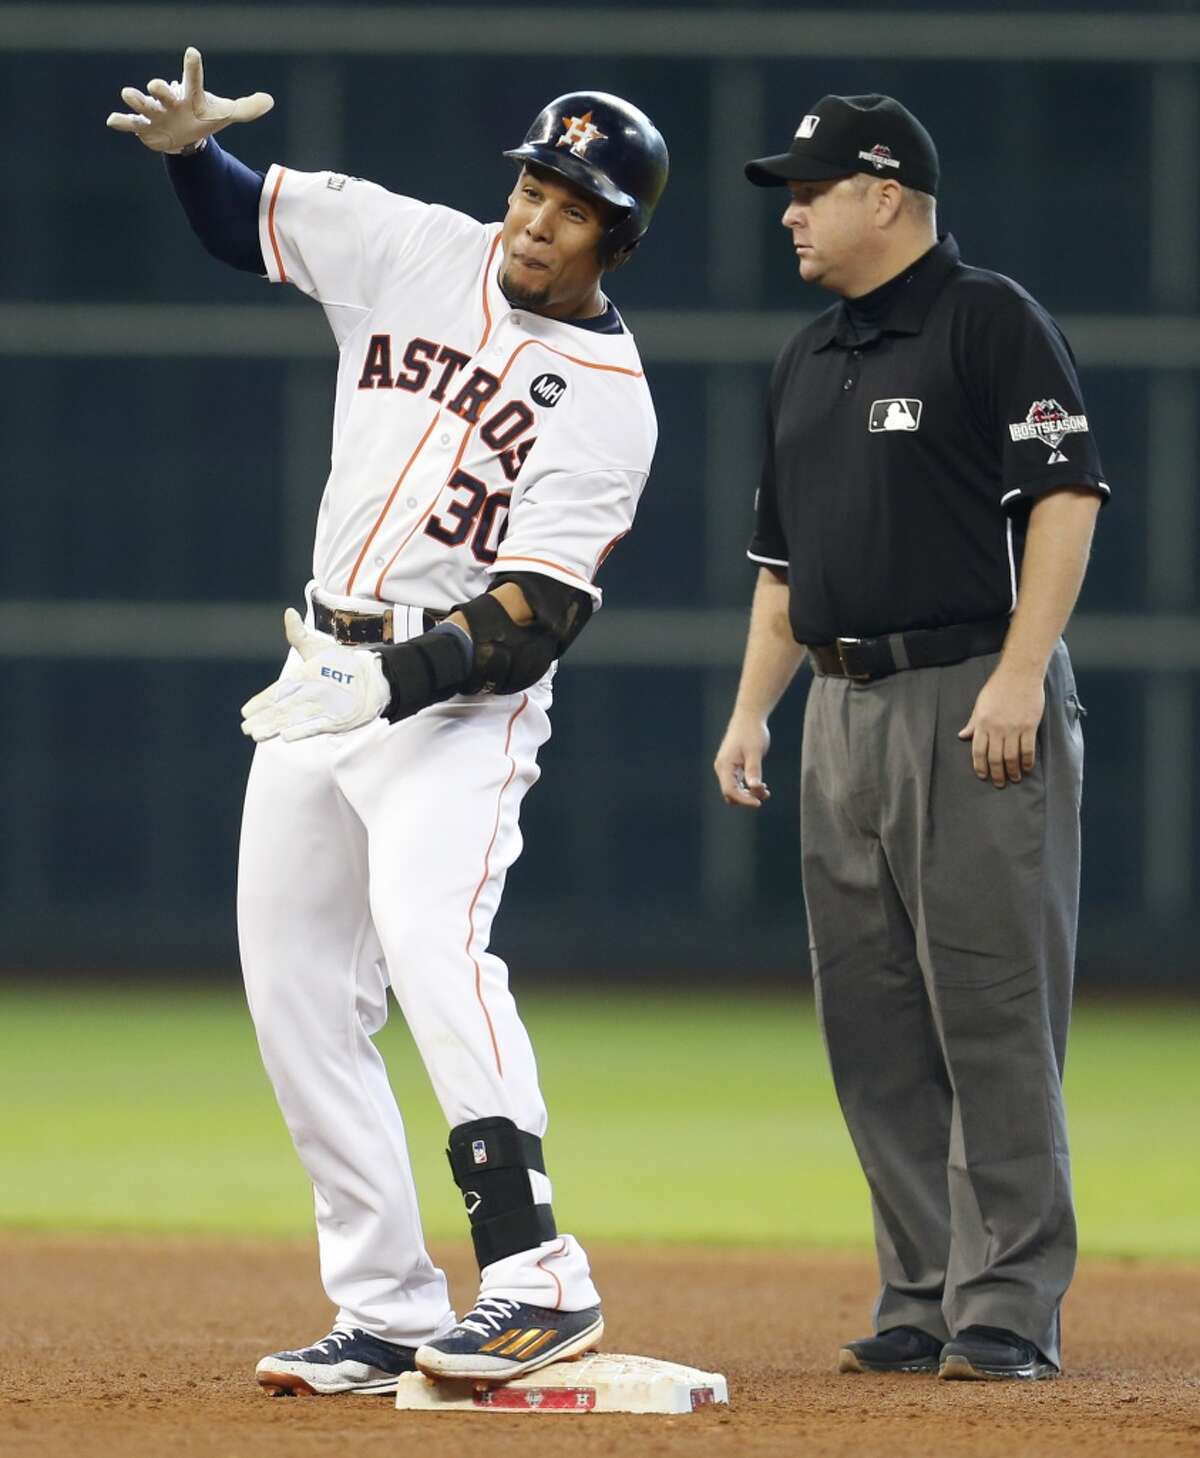 Houston Astros center fielder Carlos Gomez (30) reacts at second base after singling and going to second on a throw during the seventh inning of Game 4 of the American League Division Series against the Kansas City Royals at Minute Maid Park on Monday, Oct. 12, 2015, in Houston. ( Karen Warren / Houston Chronicle )